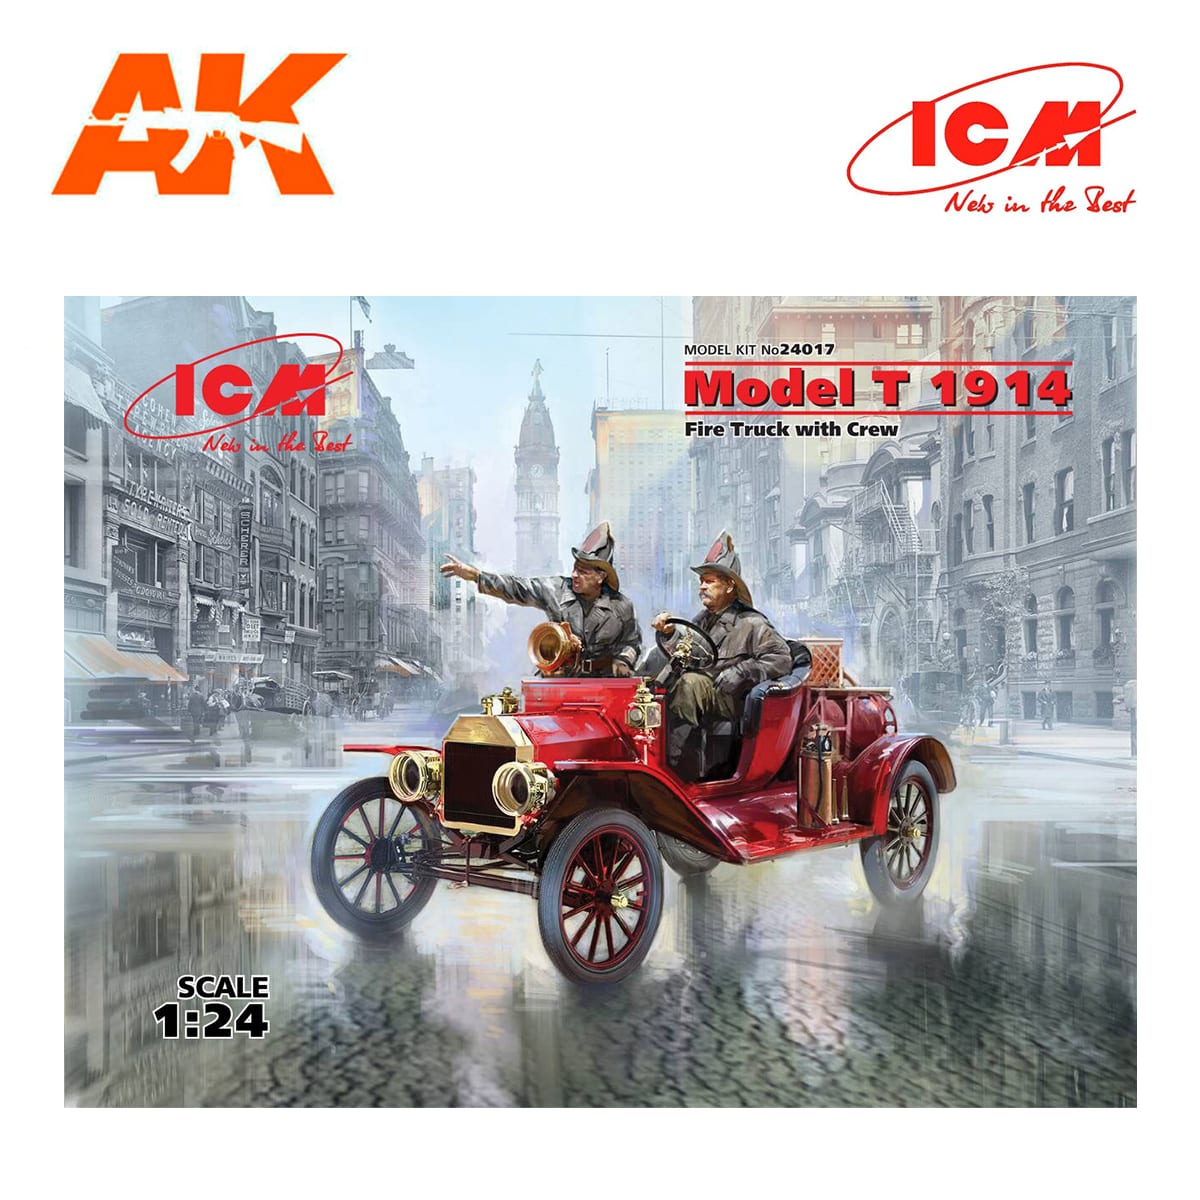 2 Figures 1/24 Scale Model Kit 75 Mm for sale online 1910s ICM 24006 American Fire Truck Crew